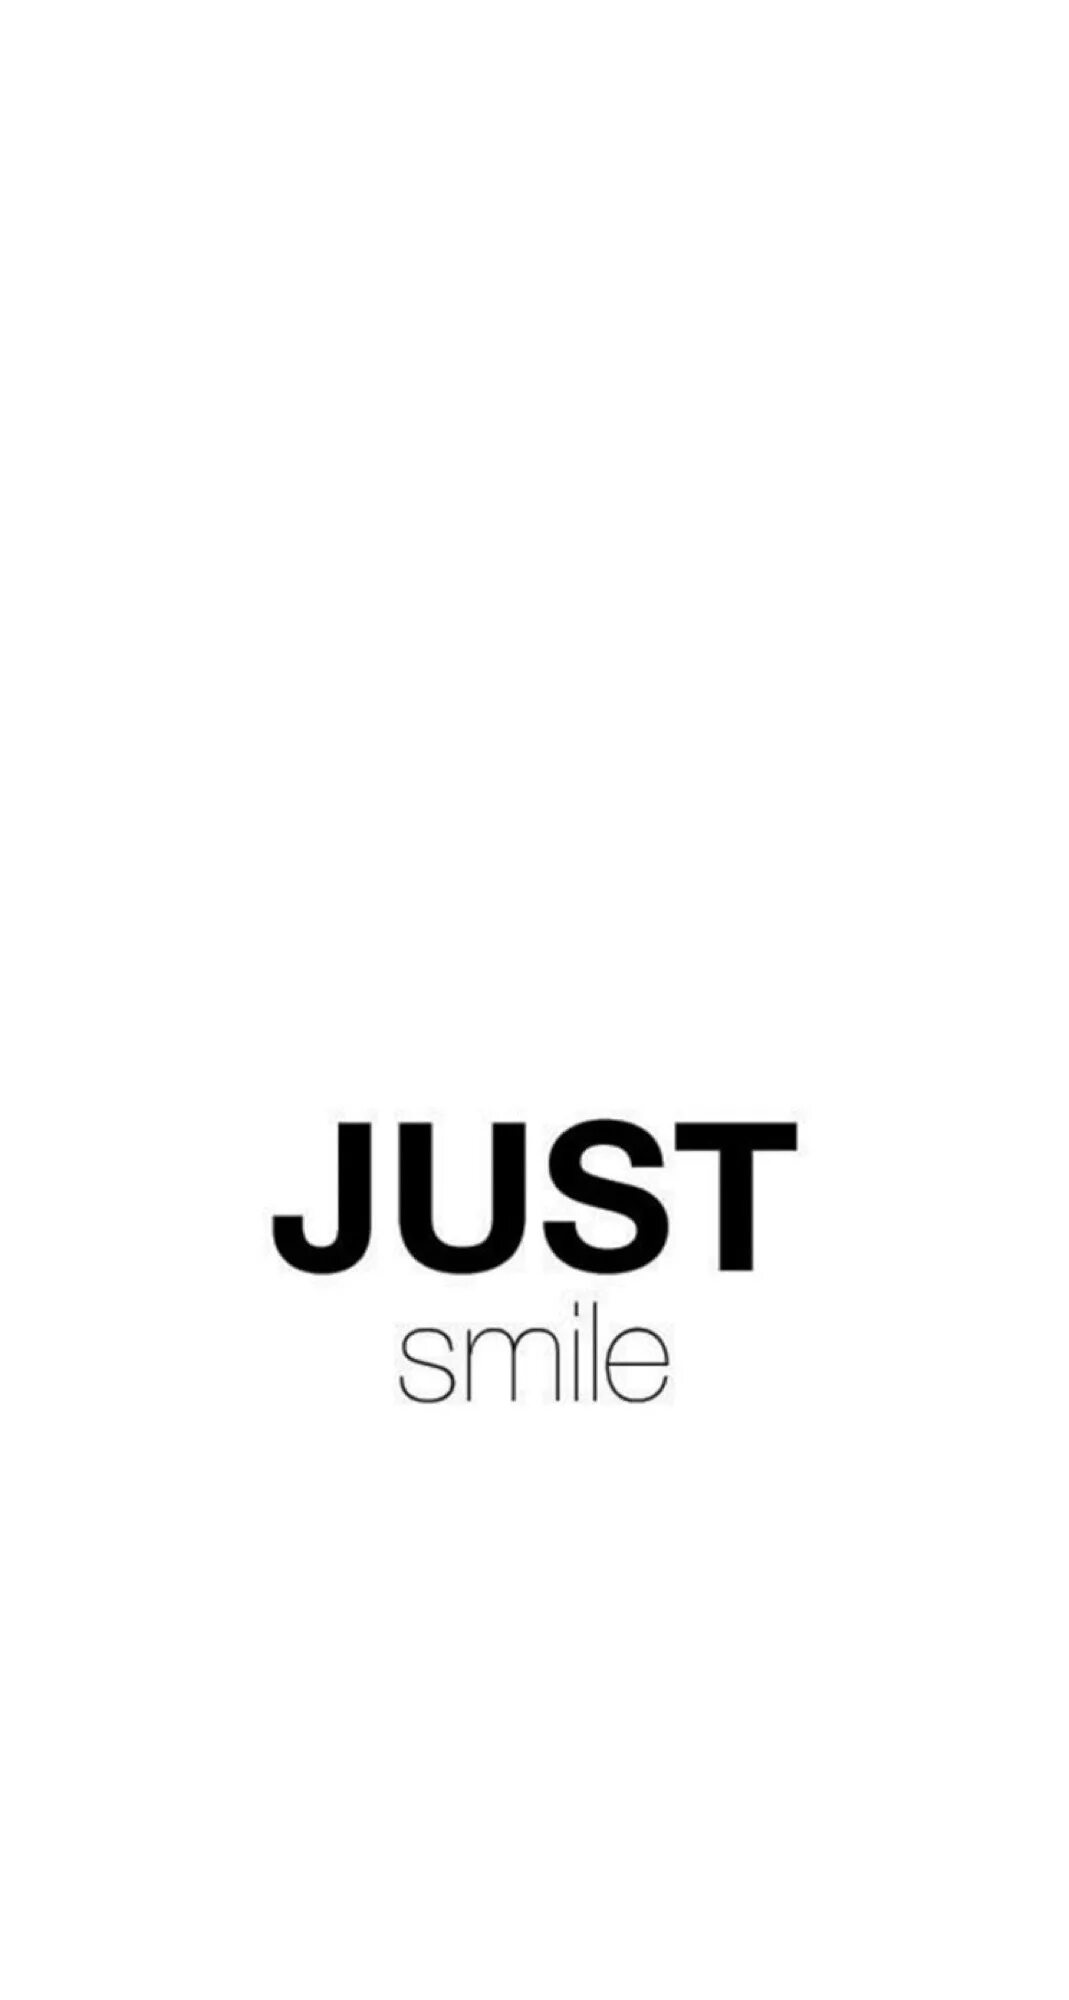 Just love life. Just smile. Just smile картинки. Картинки с надписью just simple. Just smile quotes.